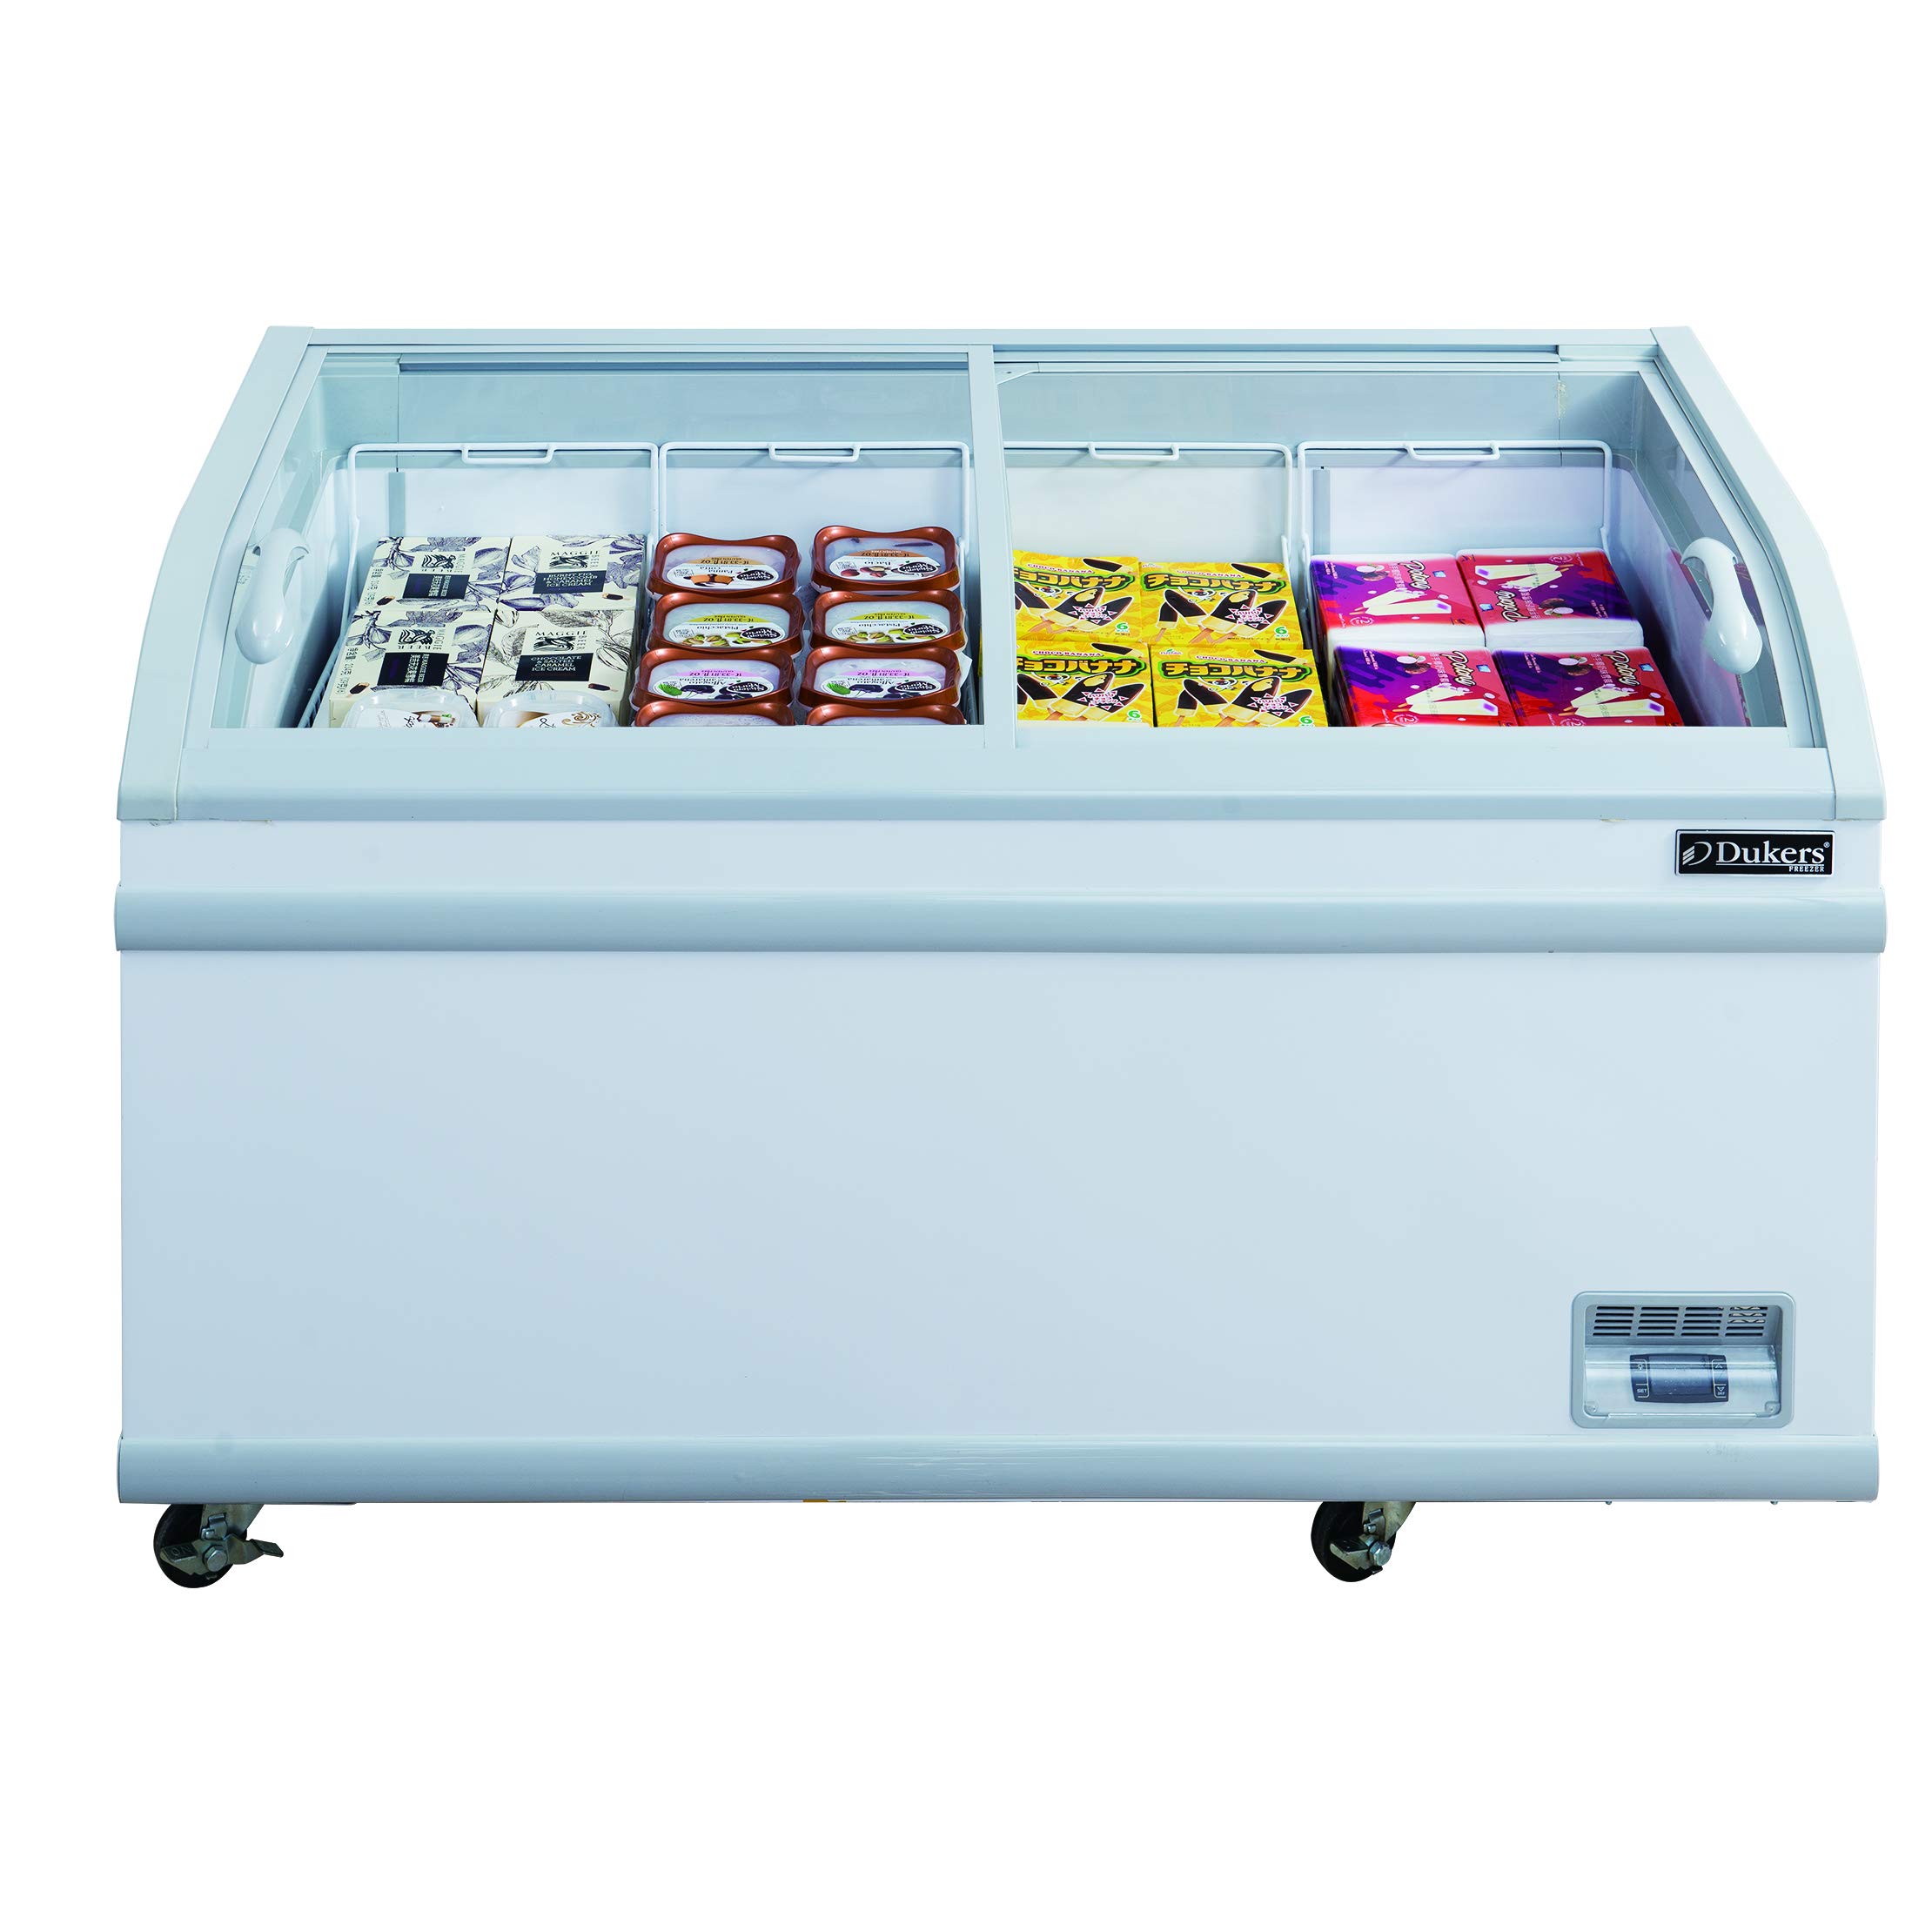 DUKERS WD-500Y 17.6 cu. ft. Commercial Chest Freezer in White